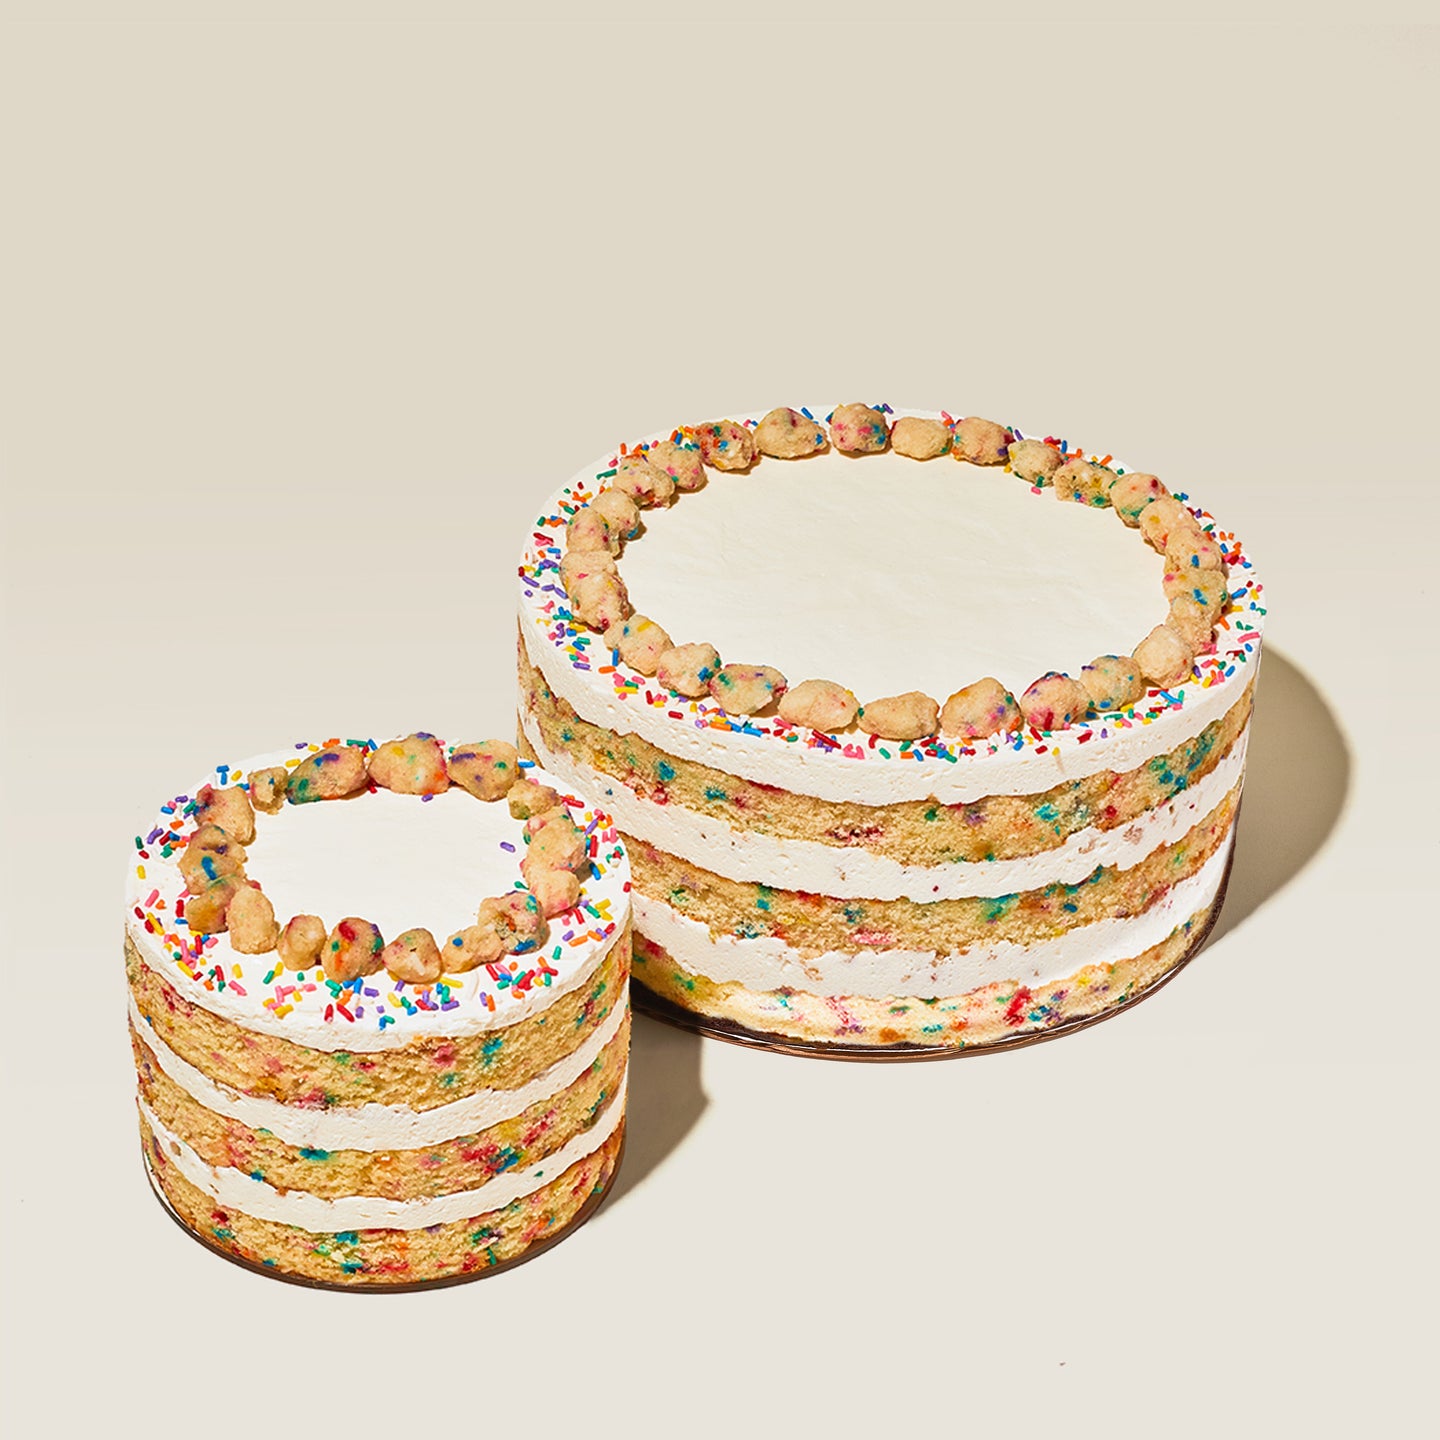 6-inch and 10-inch Gluten Free Birthday Cakes